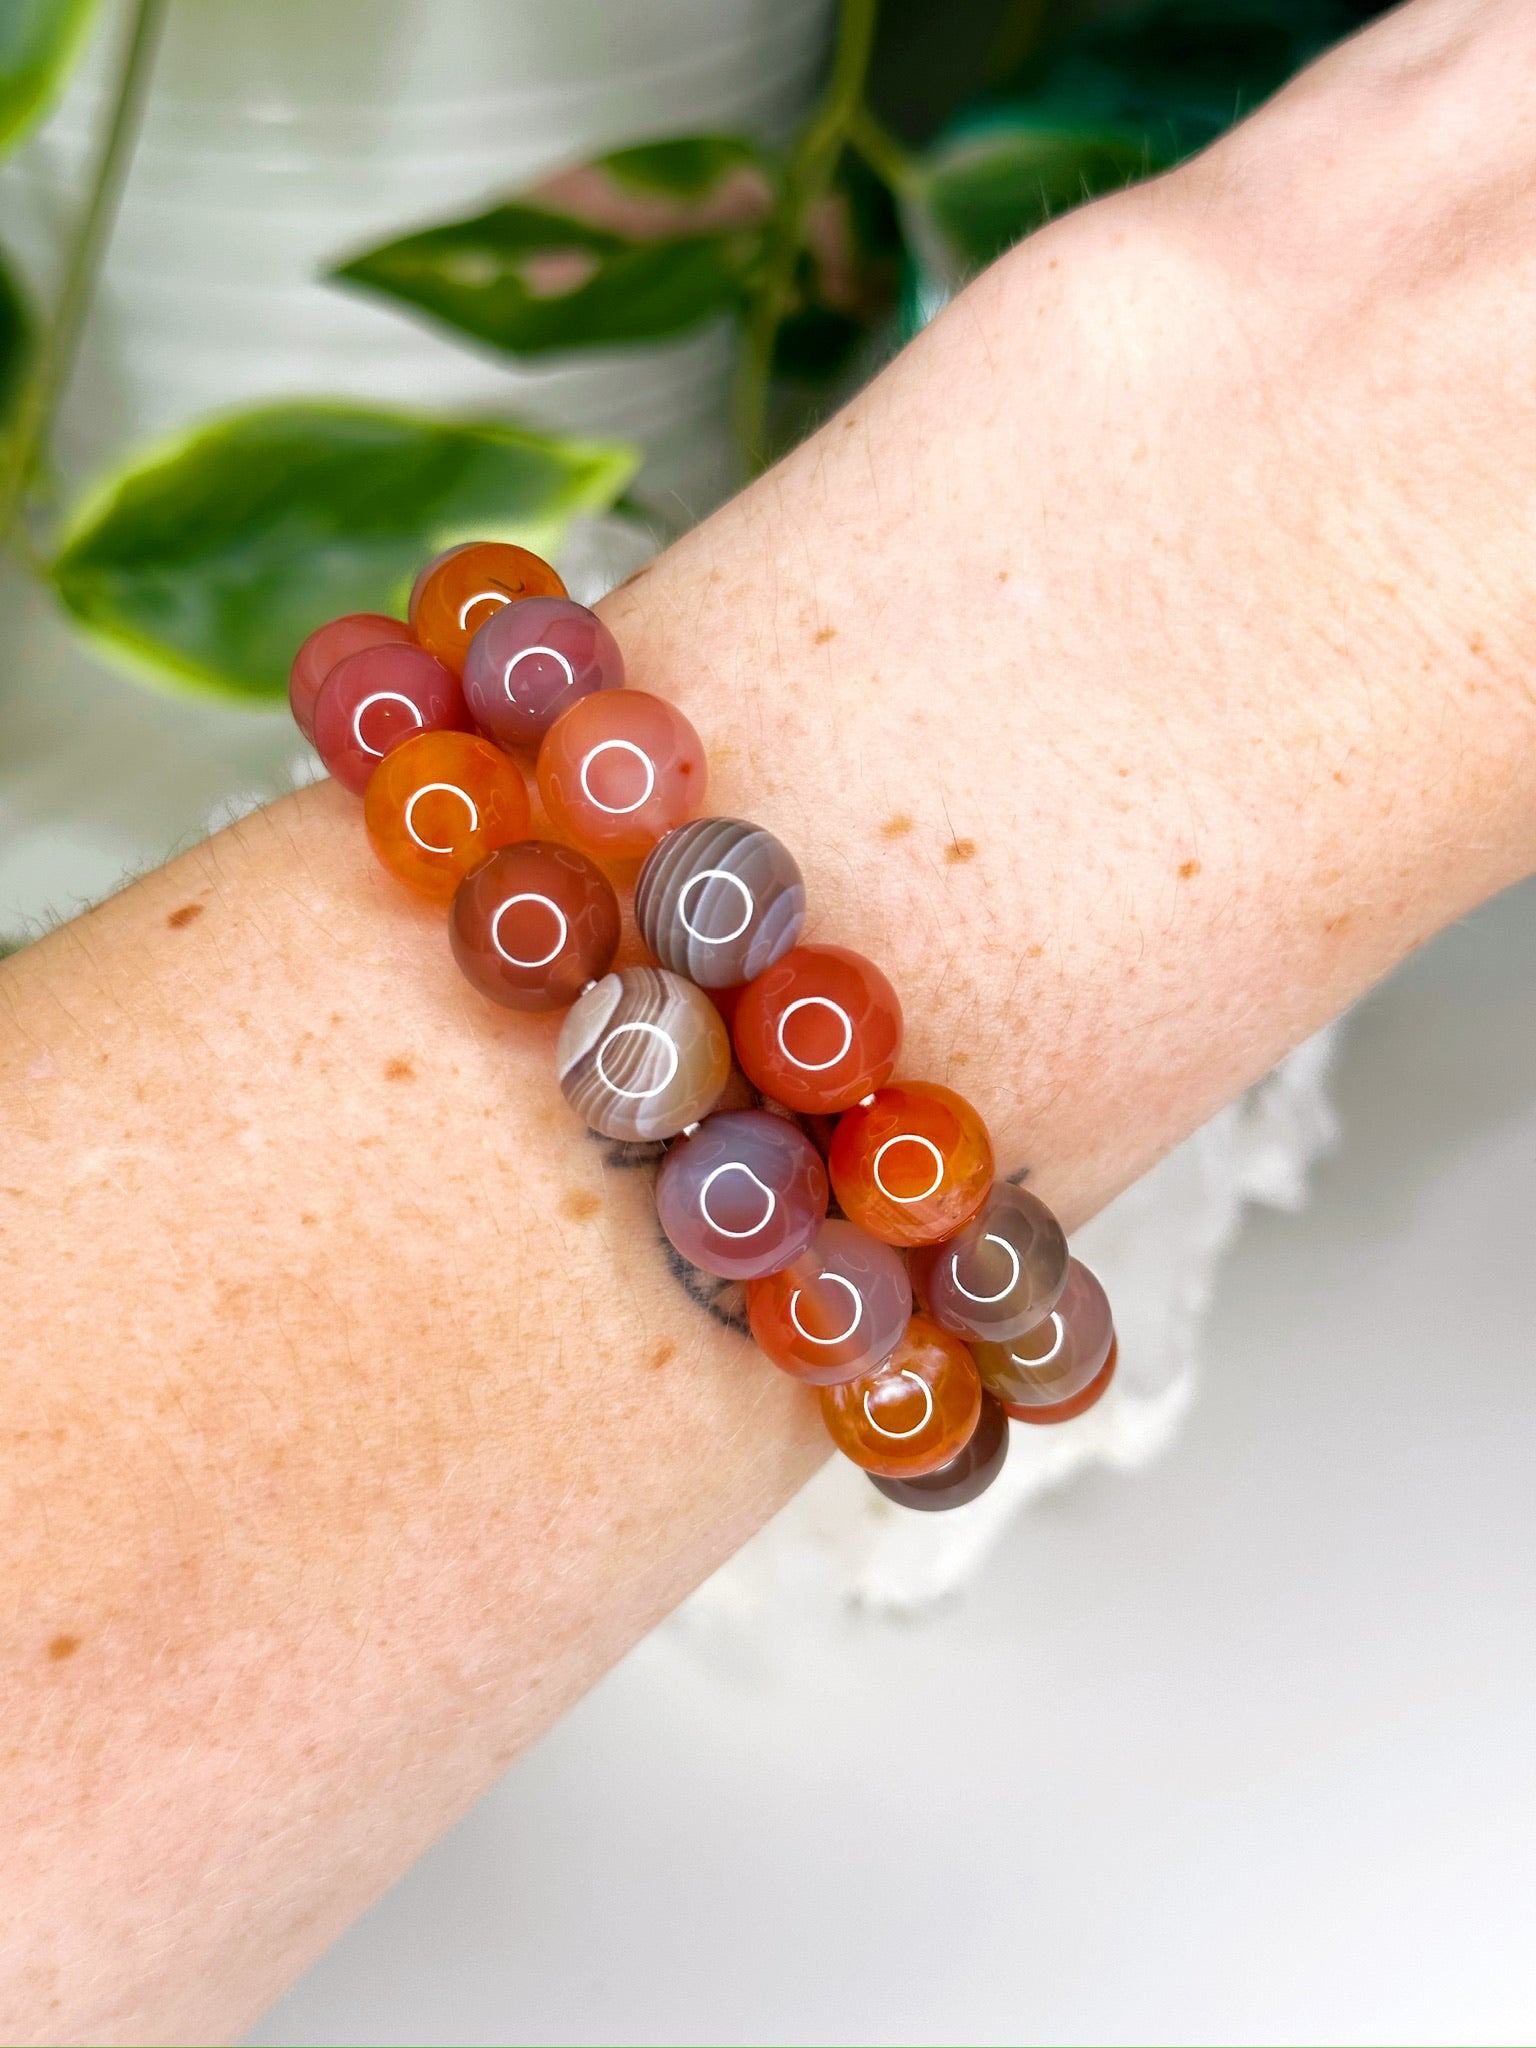 AFRICAN RED AGATE 10mm - HANDMADE CRYSTAL BRACELET - 10mm, African agate, African red agate, agate, bracelet, crystal bracelet, emotional support, fall-o-ween, fall-o-ween bracelets, fire, gemini, handmade bracelet, jewelry, market bracelet, recently added, red agate, swazi agate, Wearable - The Mineral Maven